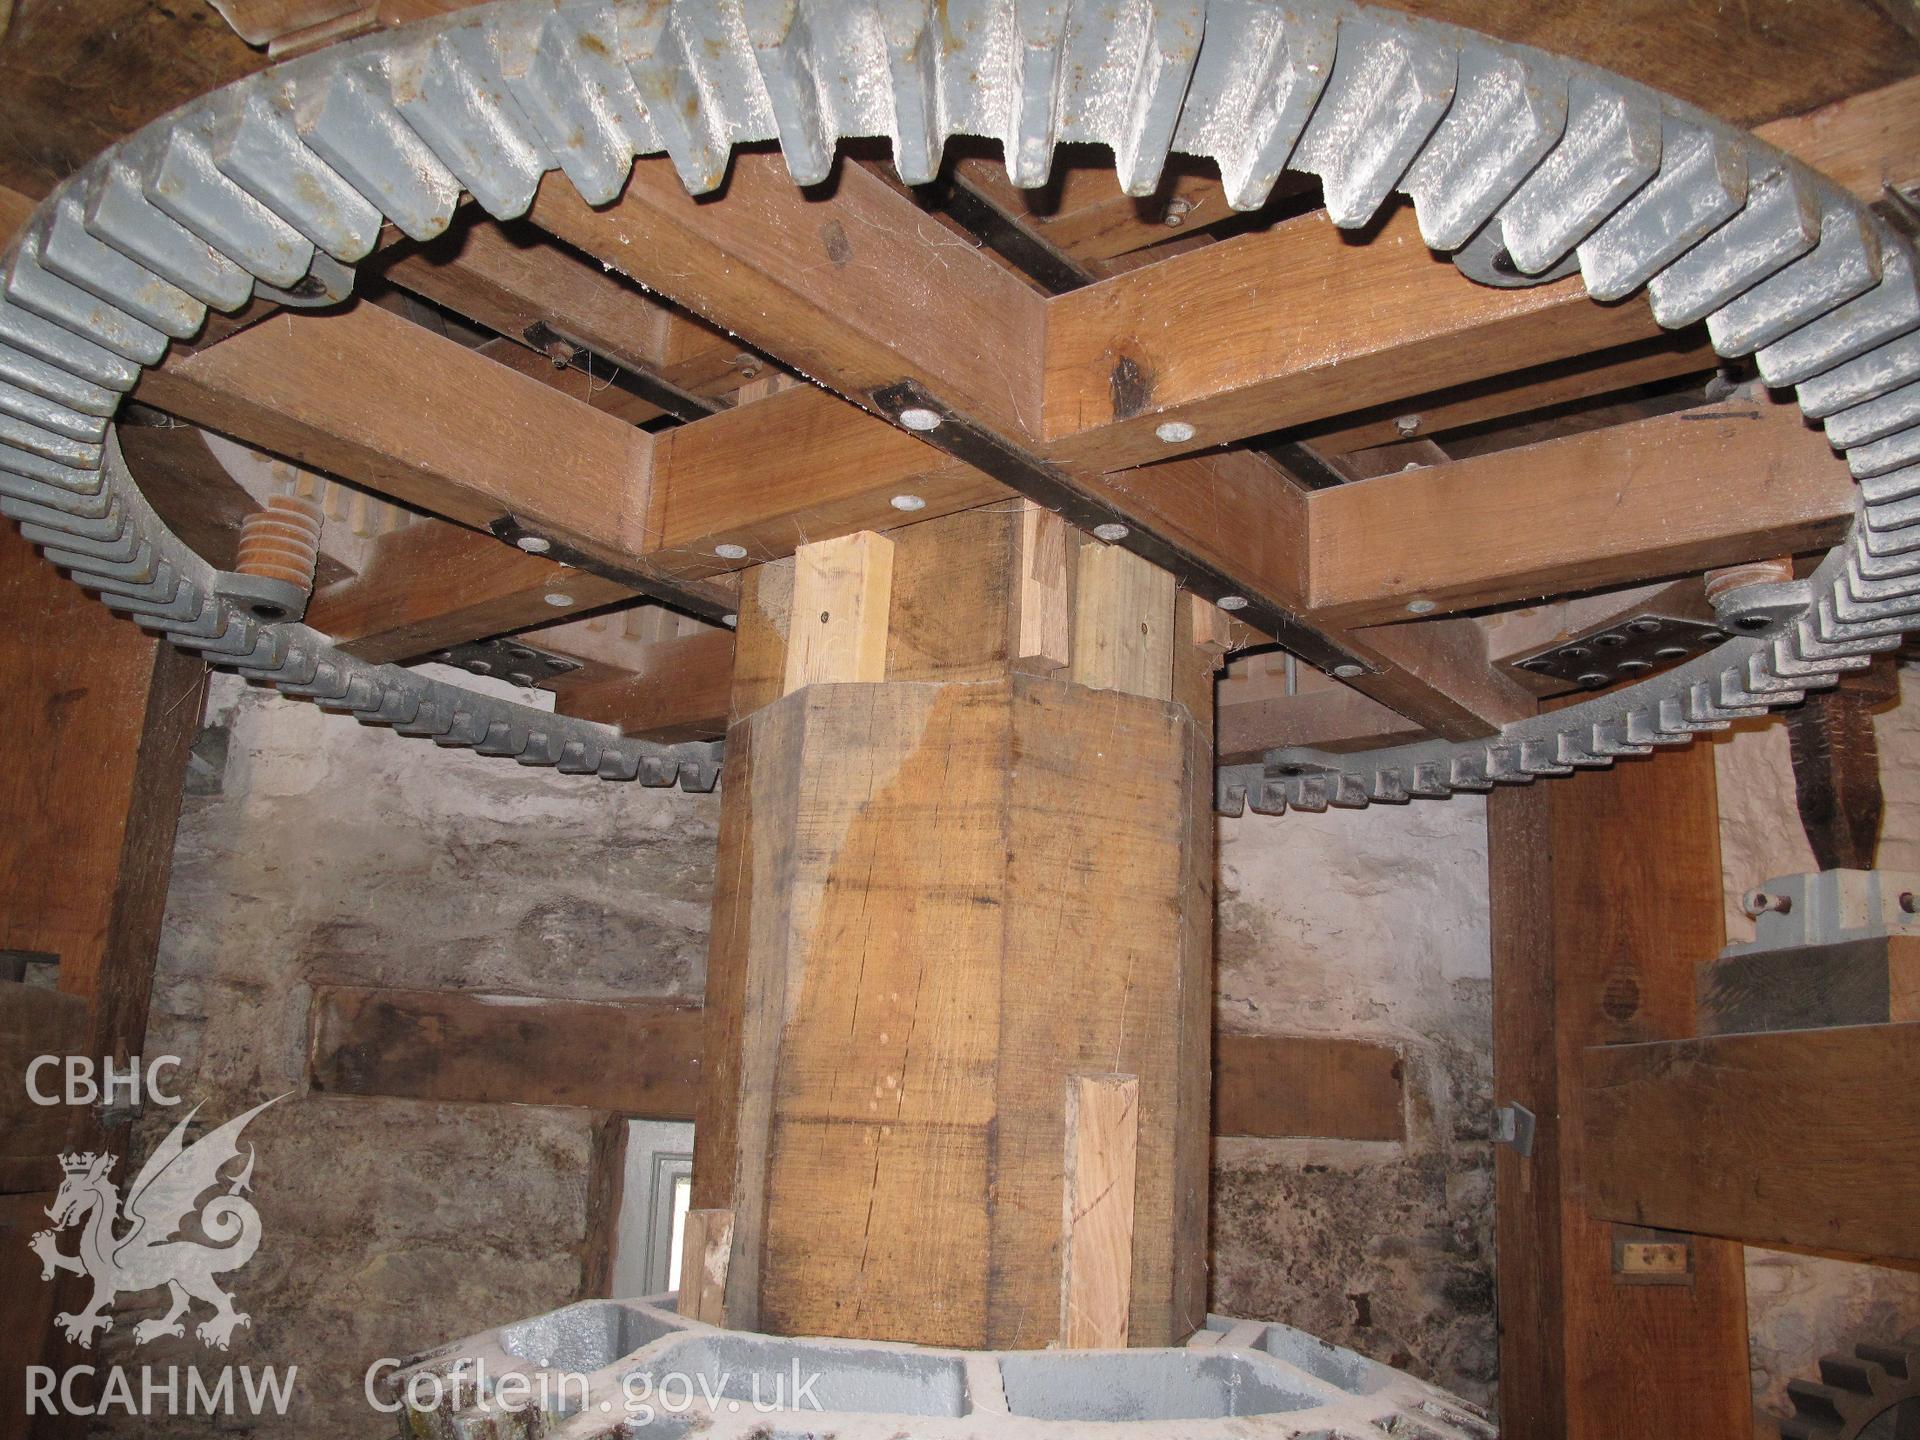 Great spur wheel, with sack-hoist gear ring mounted upside-down, at Talgarth Corn Mill.